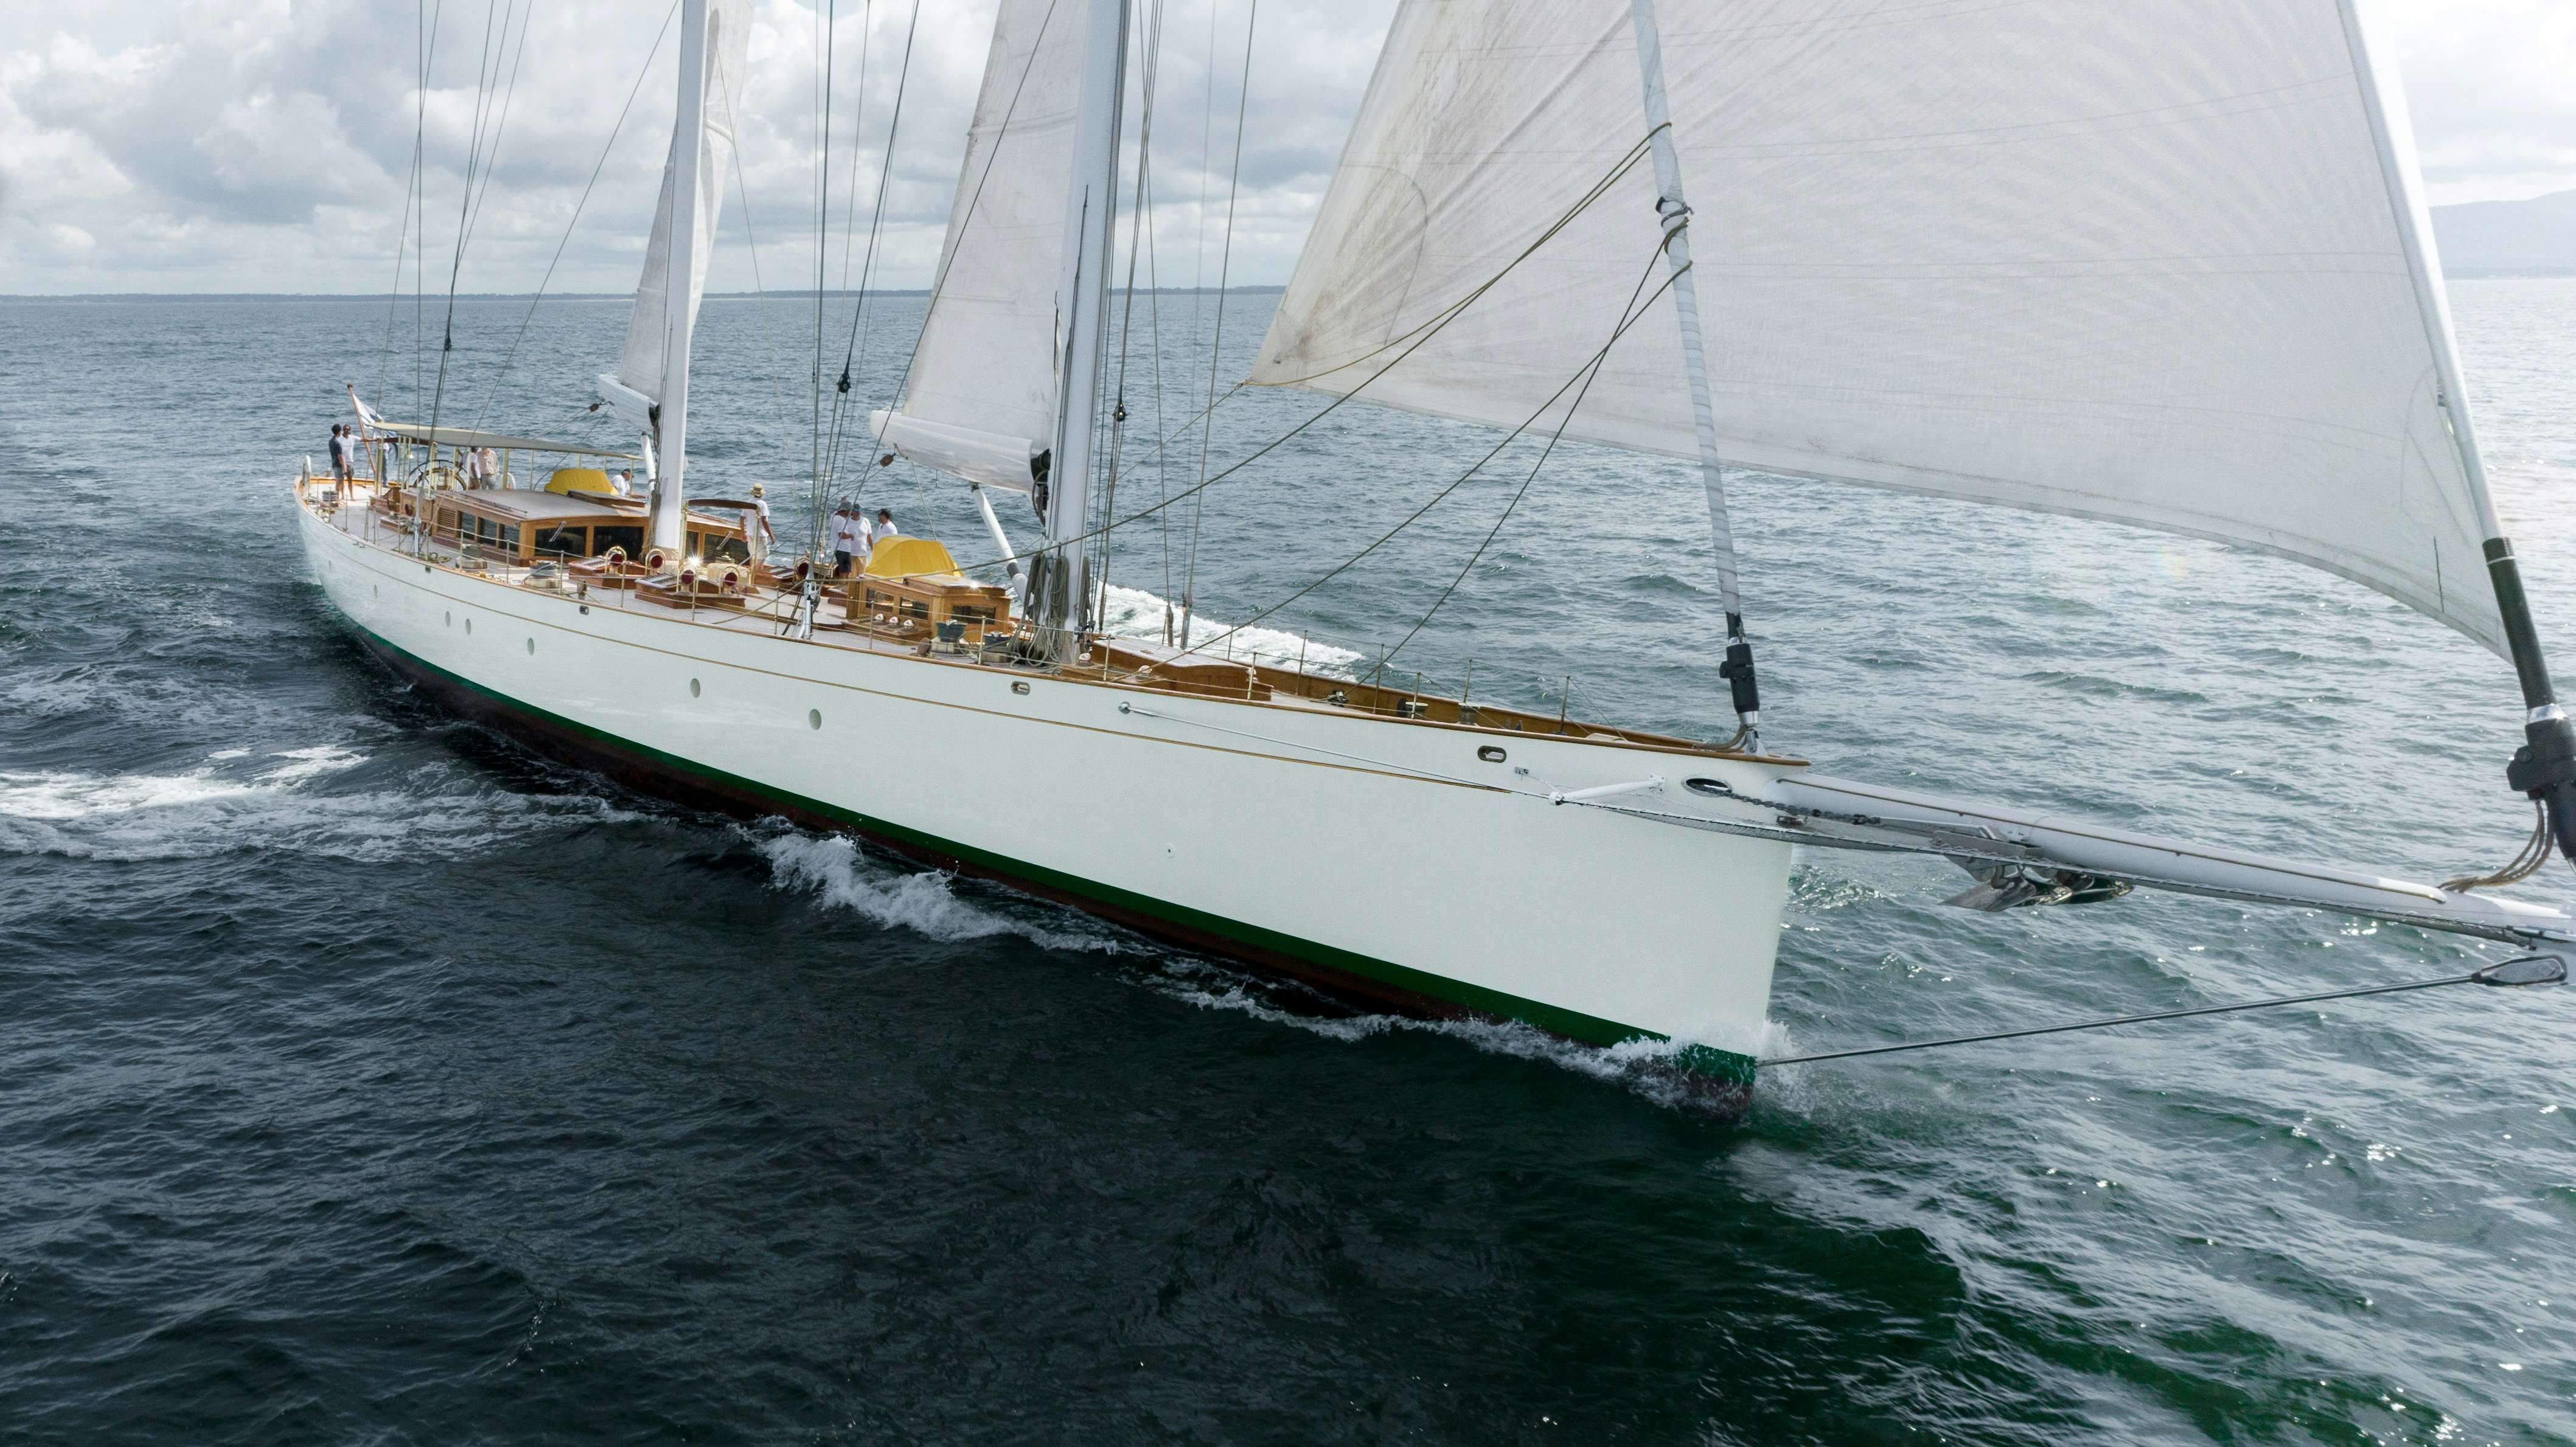 Dona francisca
Yacht for Sale